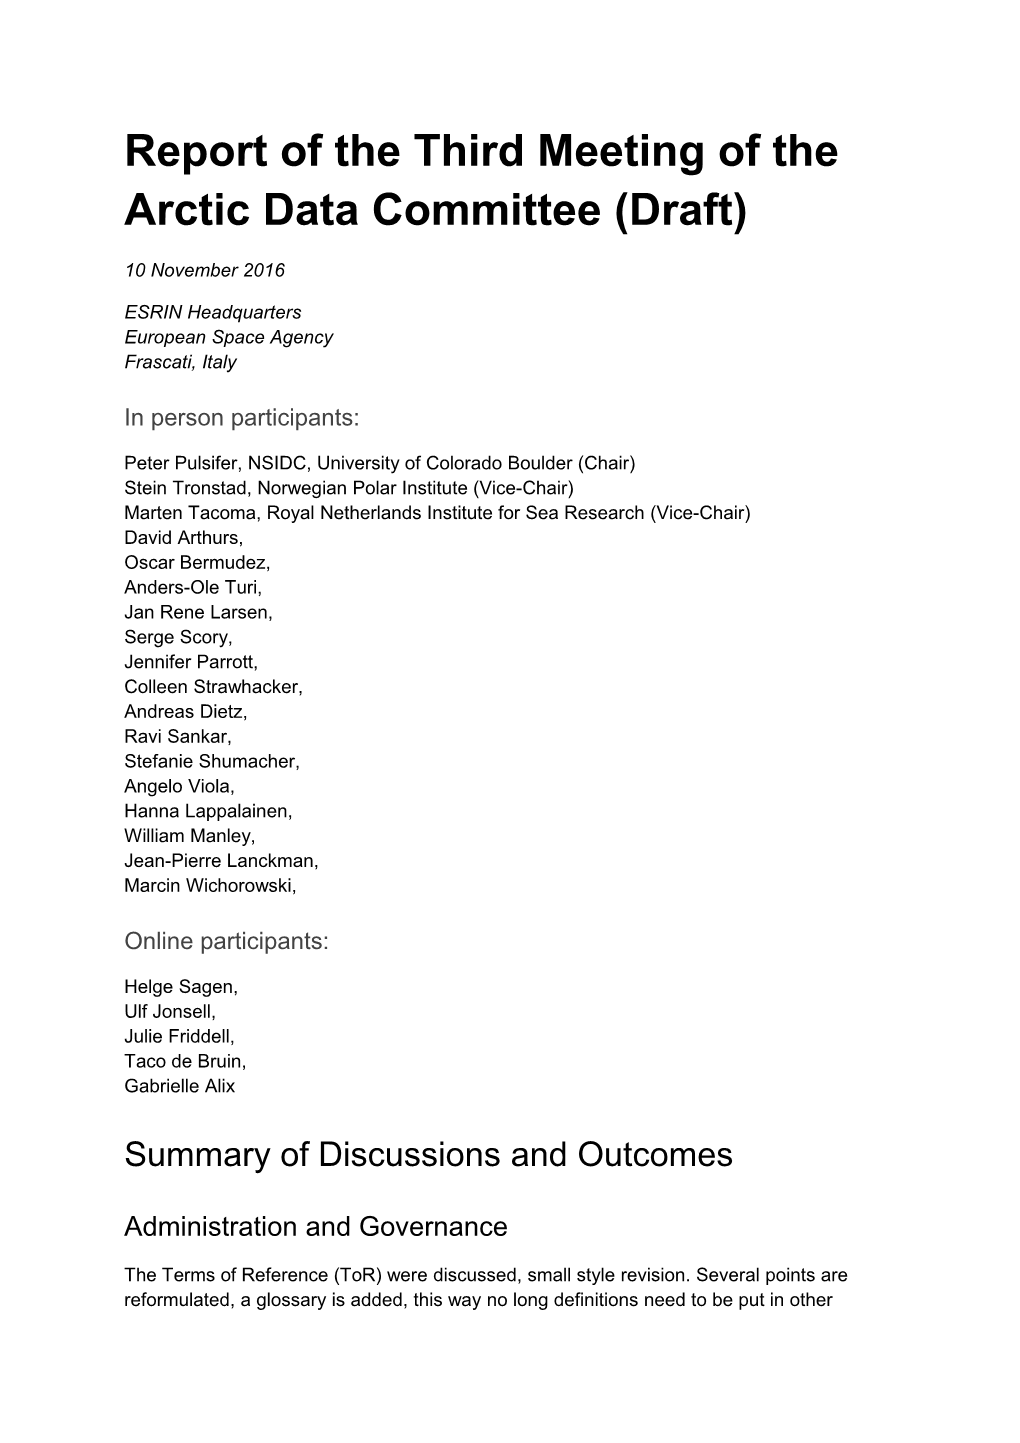 Report of the Third Meeting of the Arctic Data Committee (Draft)